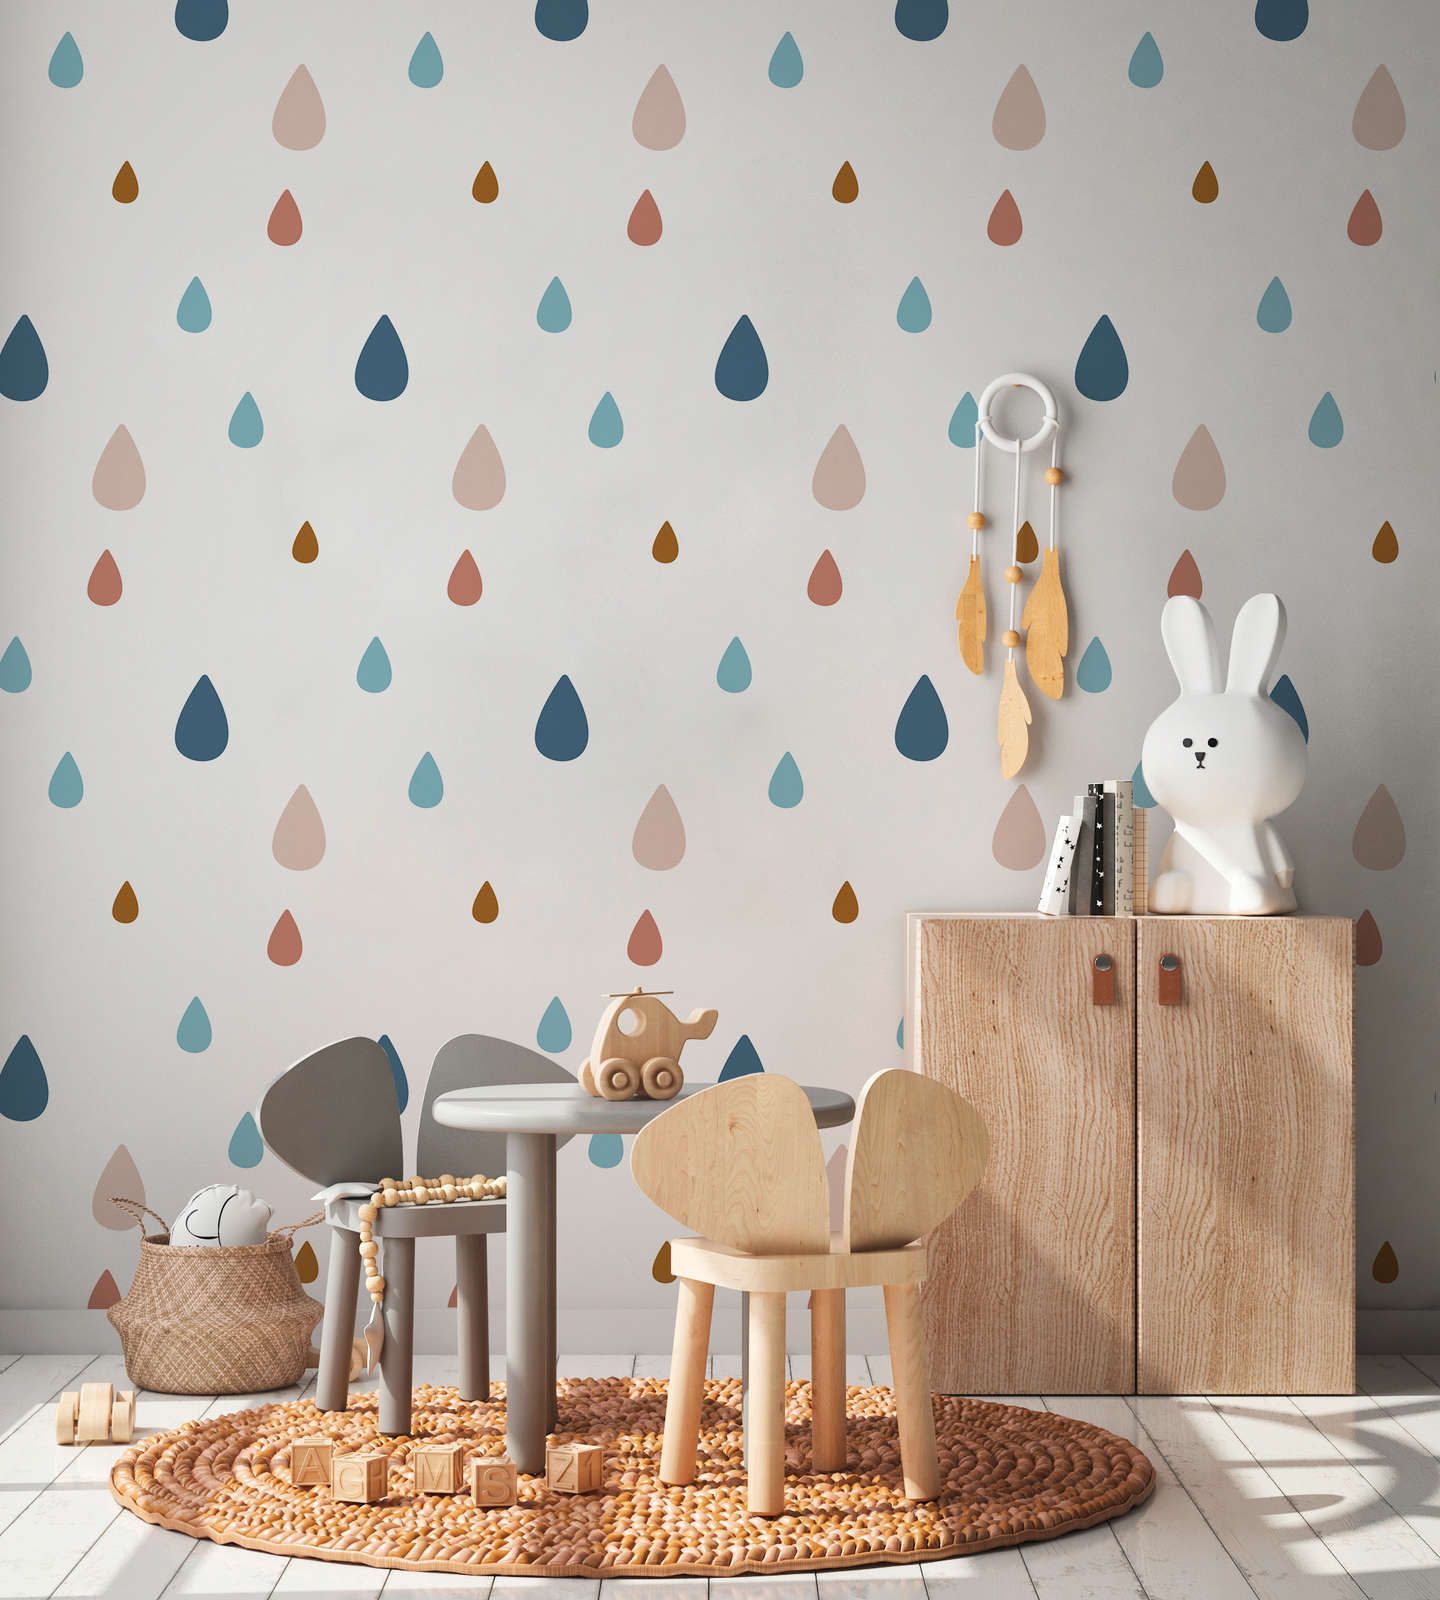             Photo wallpaper for children's room with colourful water drops - Smooth & slightly shiny non-woven
        